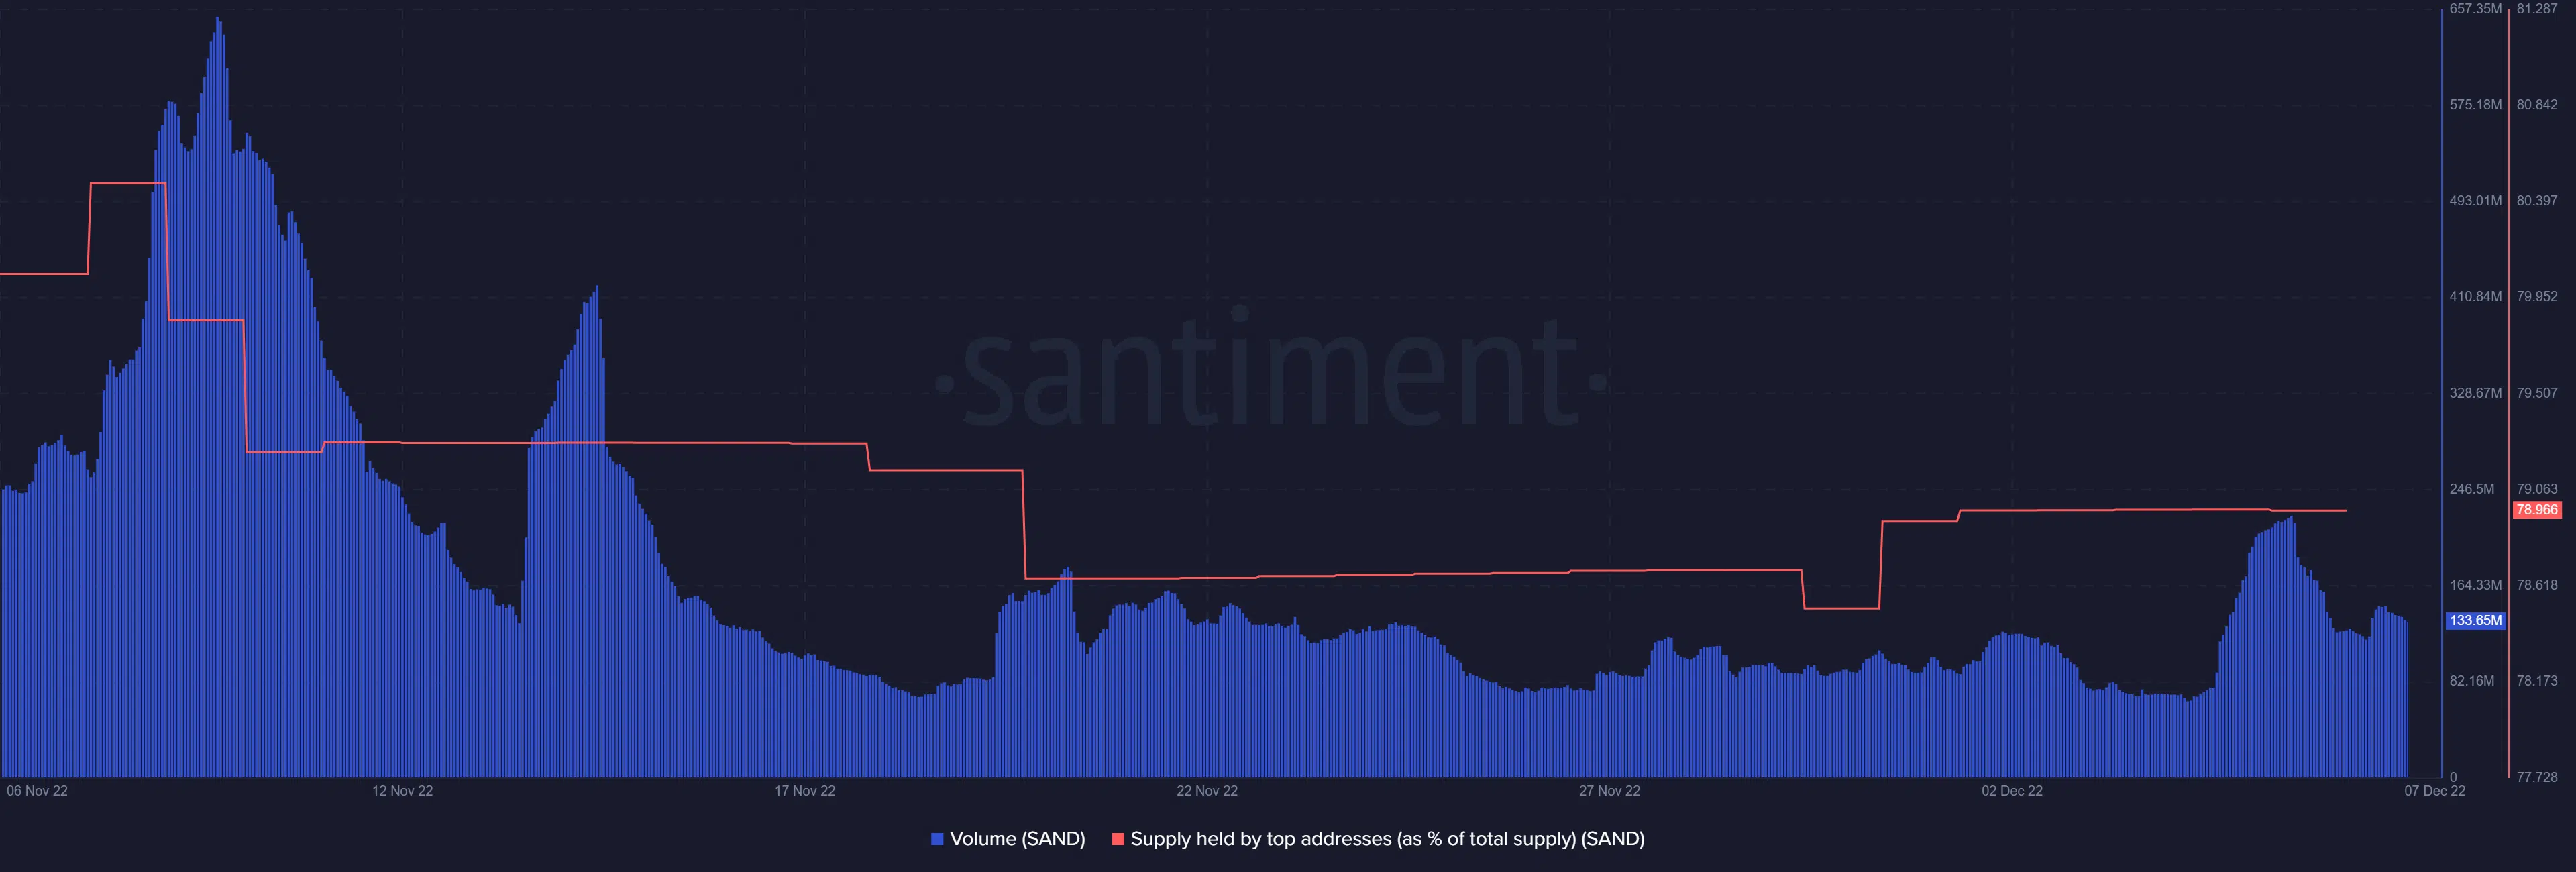 SAND volume and supply held by top 1% addresses